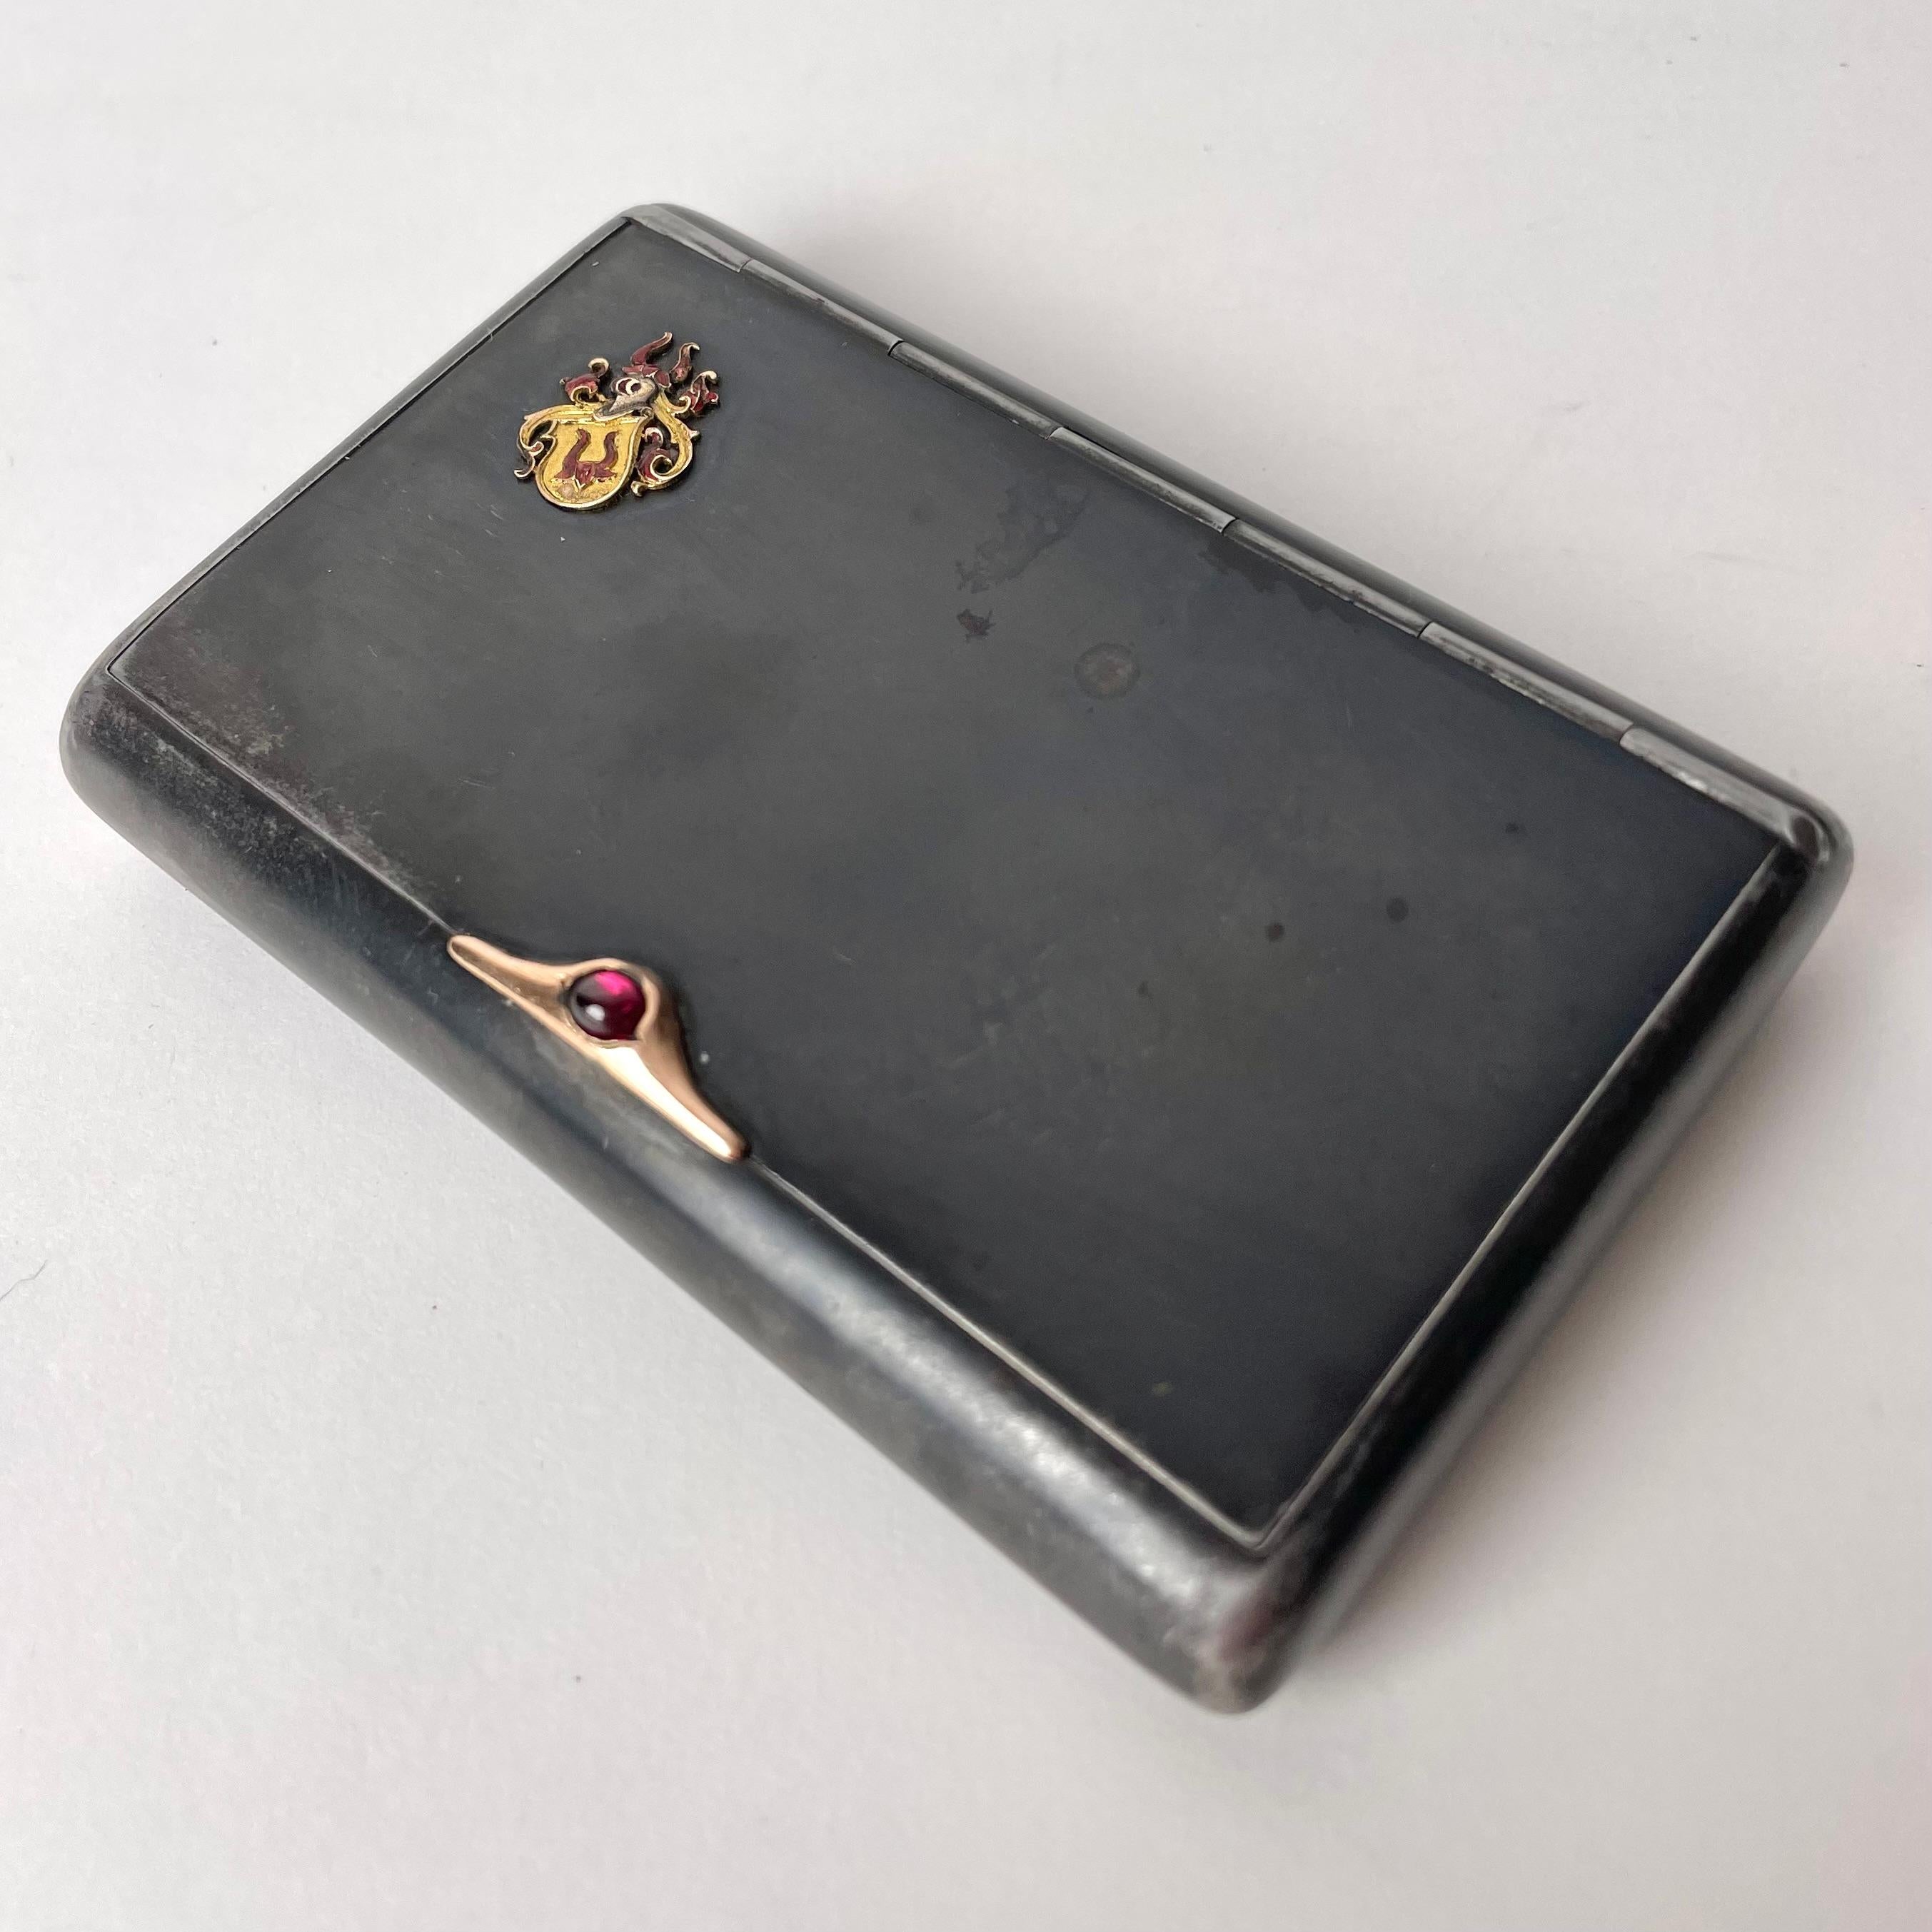 Etui in Oxidized Steel with Crest of Swedish Noble Family Oxenstierna 19th Century. Entirely in oxidized black steel, except for aforementioned crest and silvered hatch. Slightly rounded edges, leading to an elegant appearance.

Belonged to the